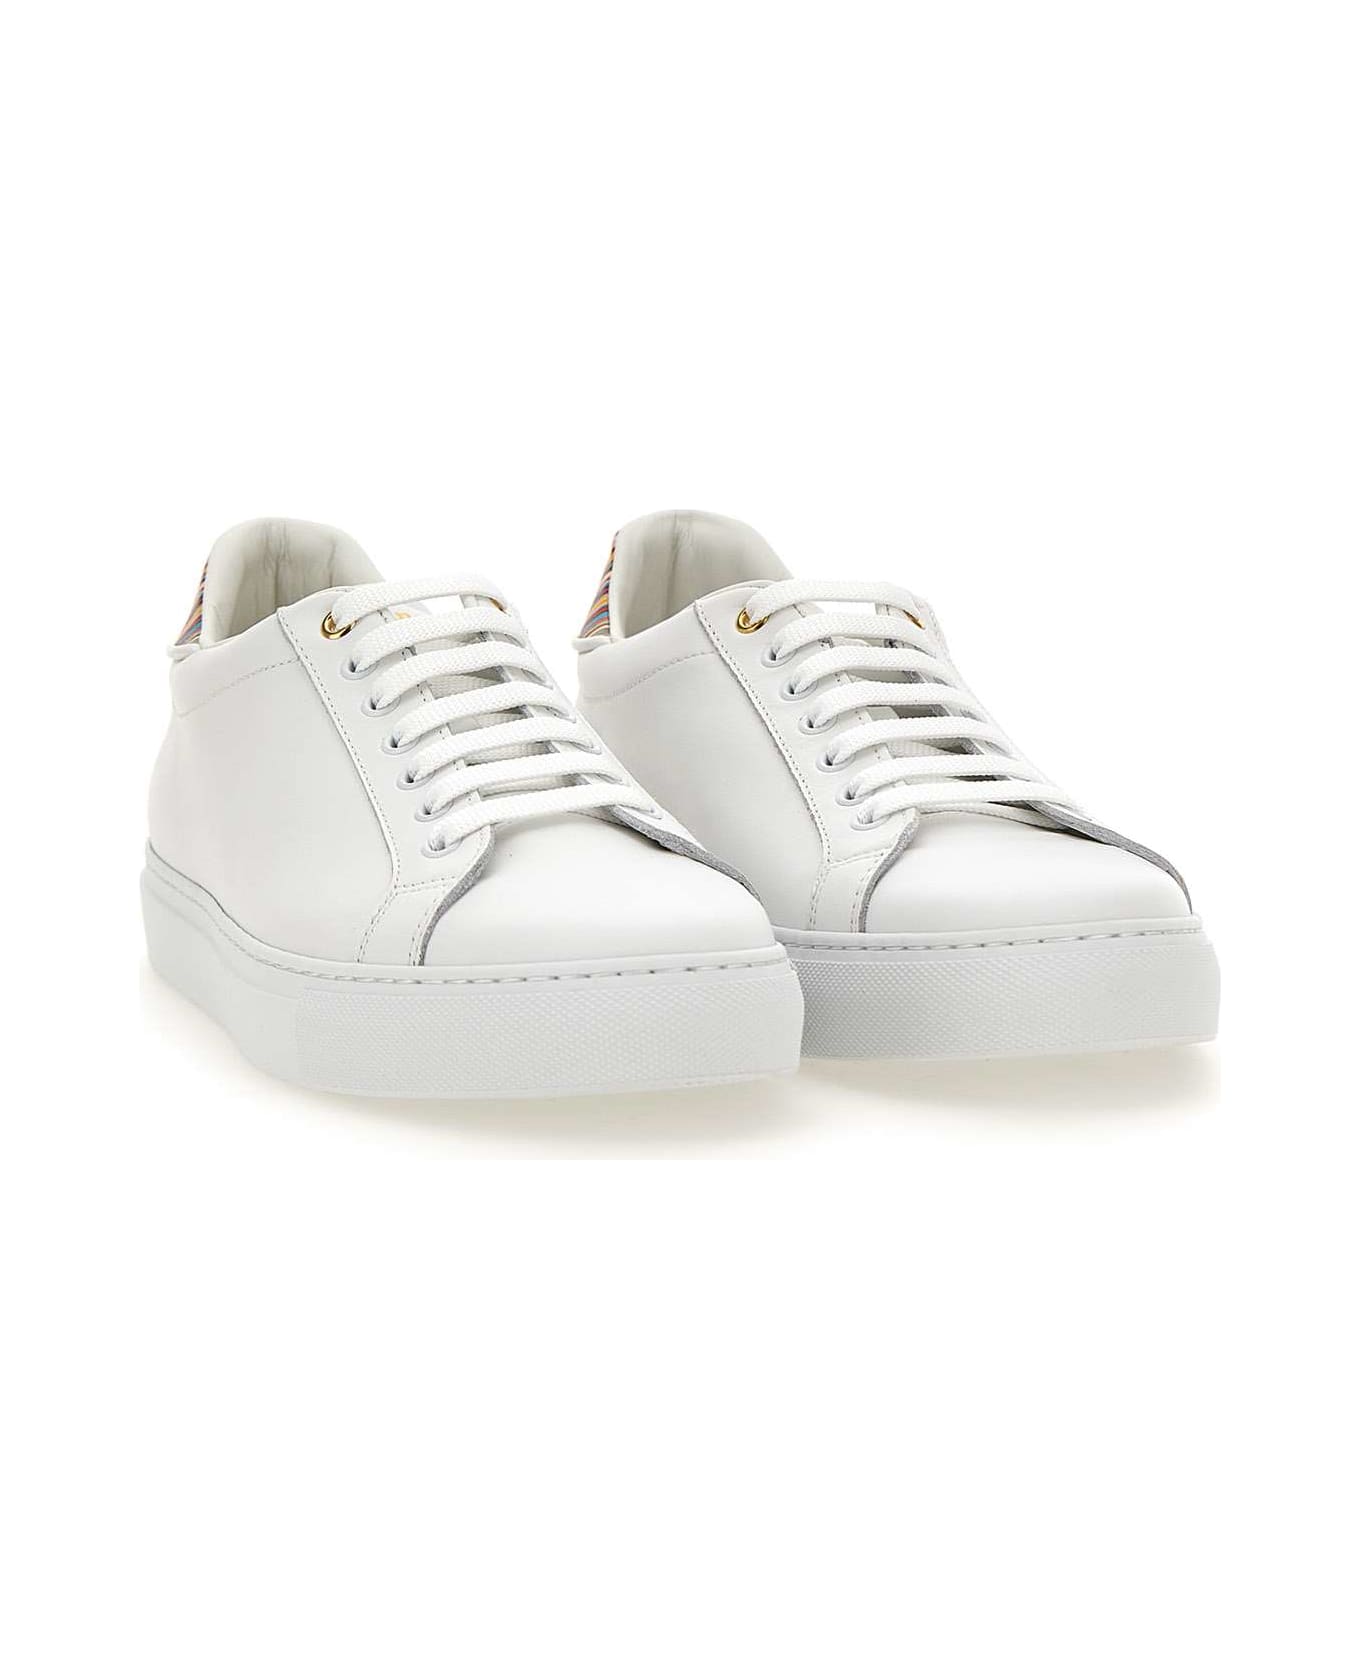 Paul Smith "beck" Sneakers - WHITE